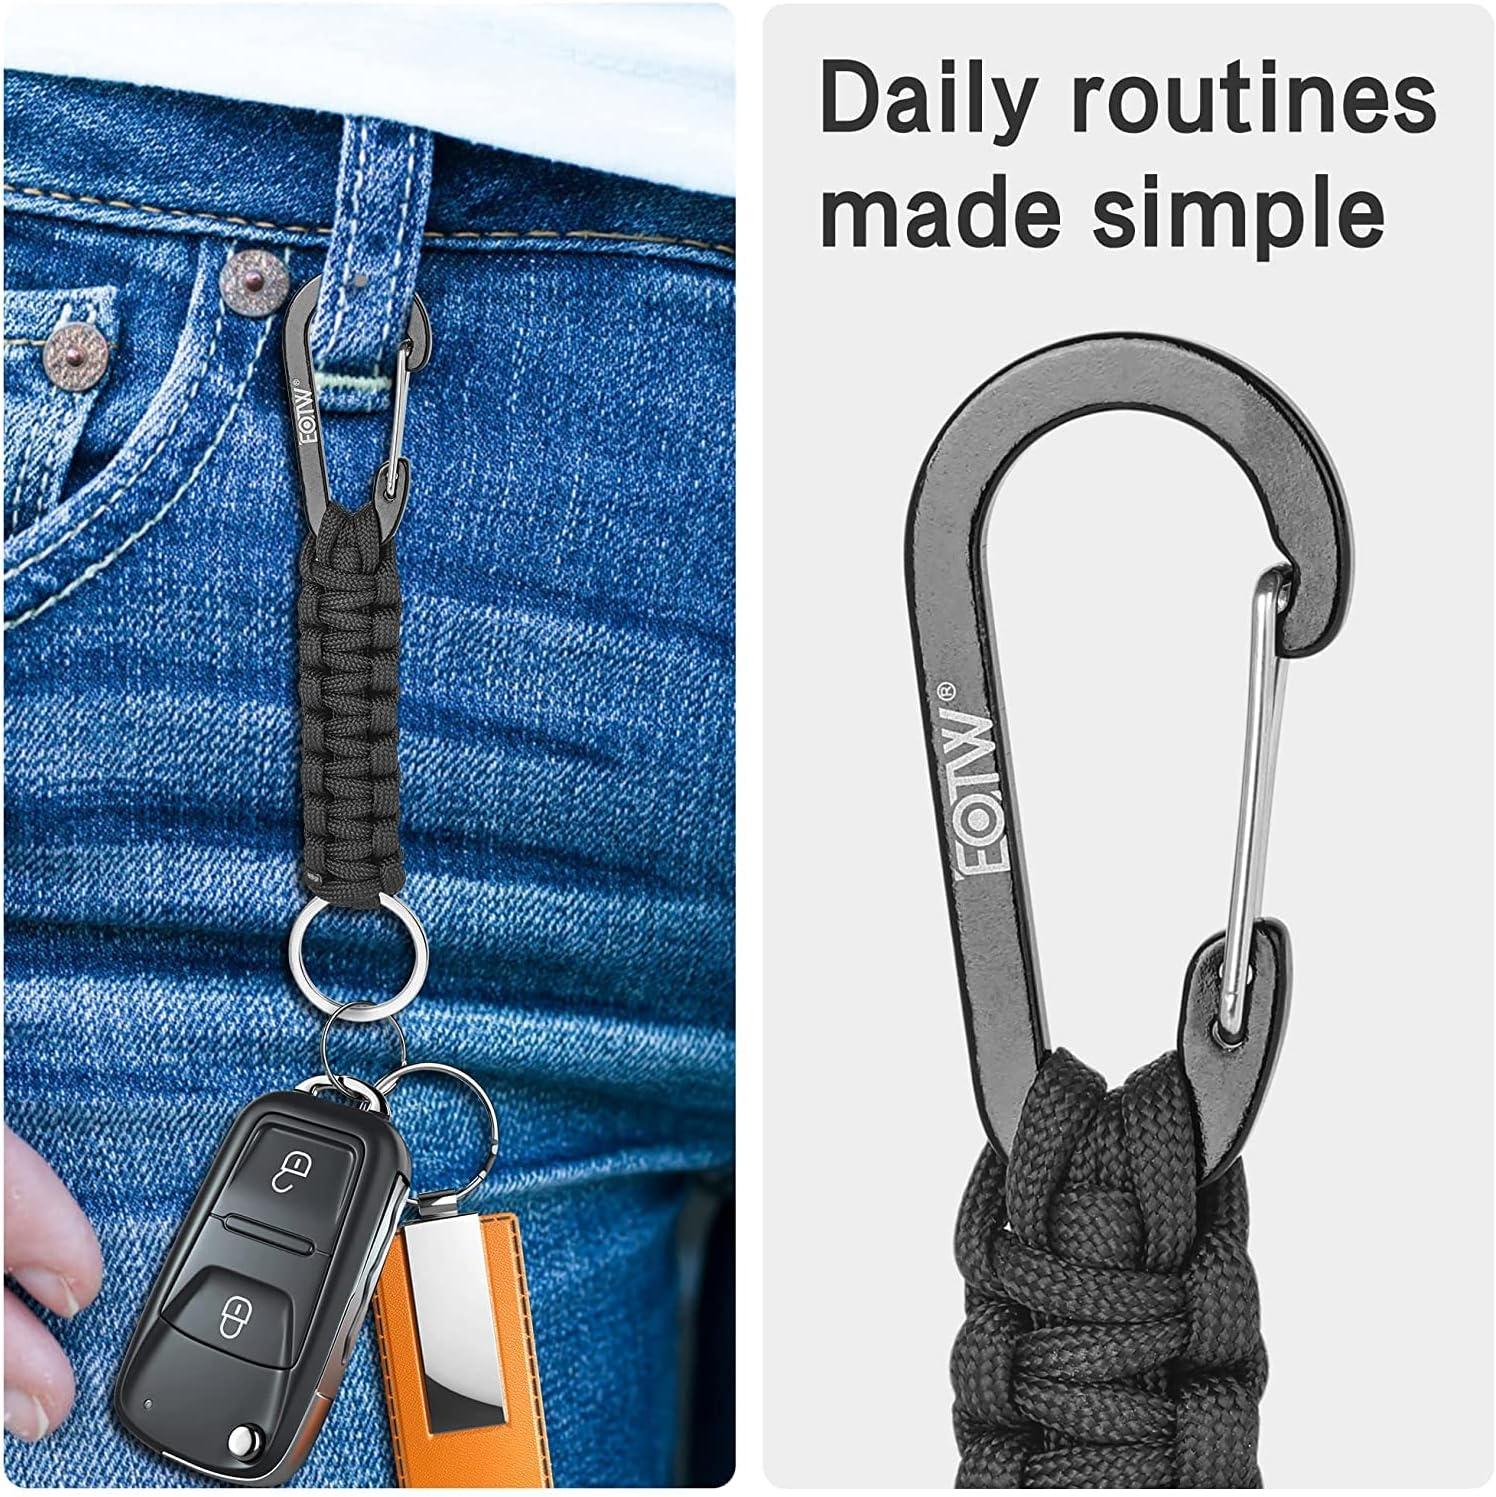 Carabiner for Keys. Key Chain with Ring Stock Photo - Image of